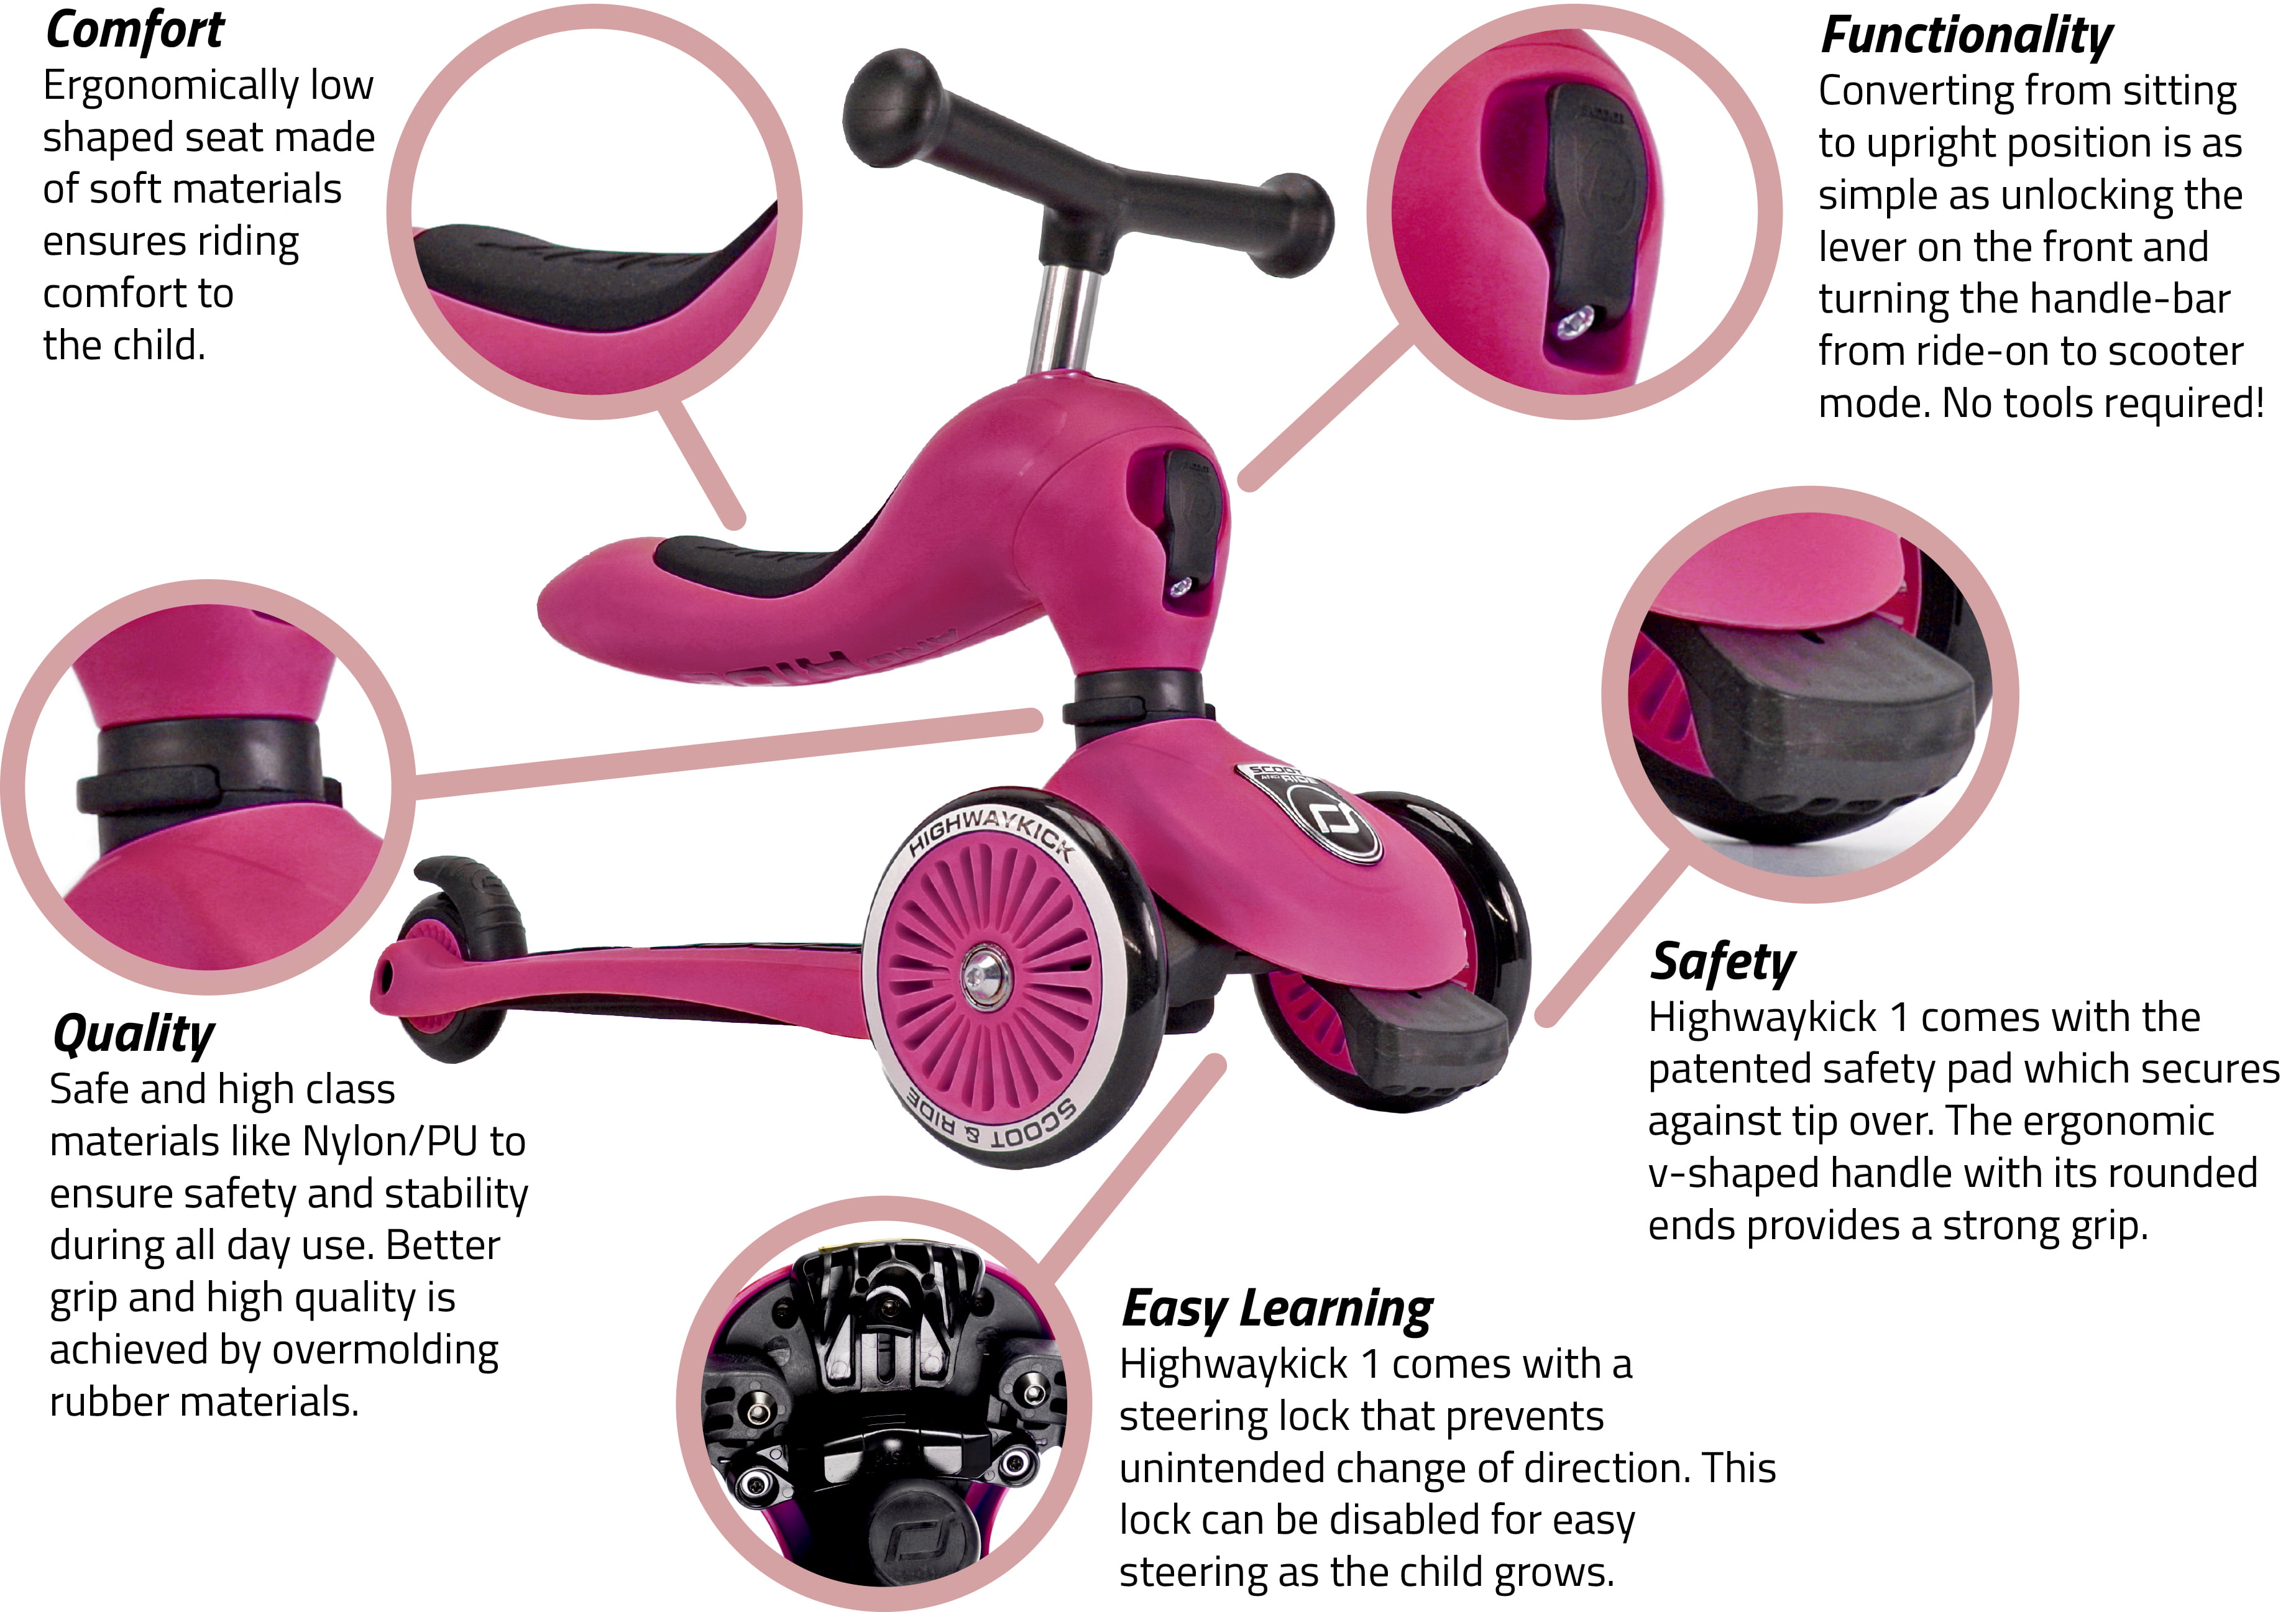 scoot and ride pink